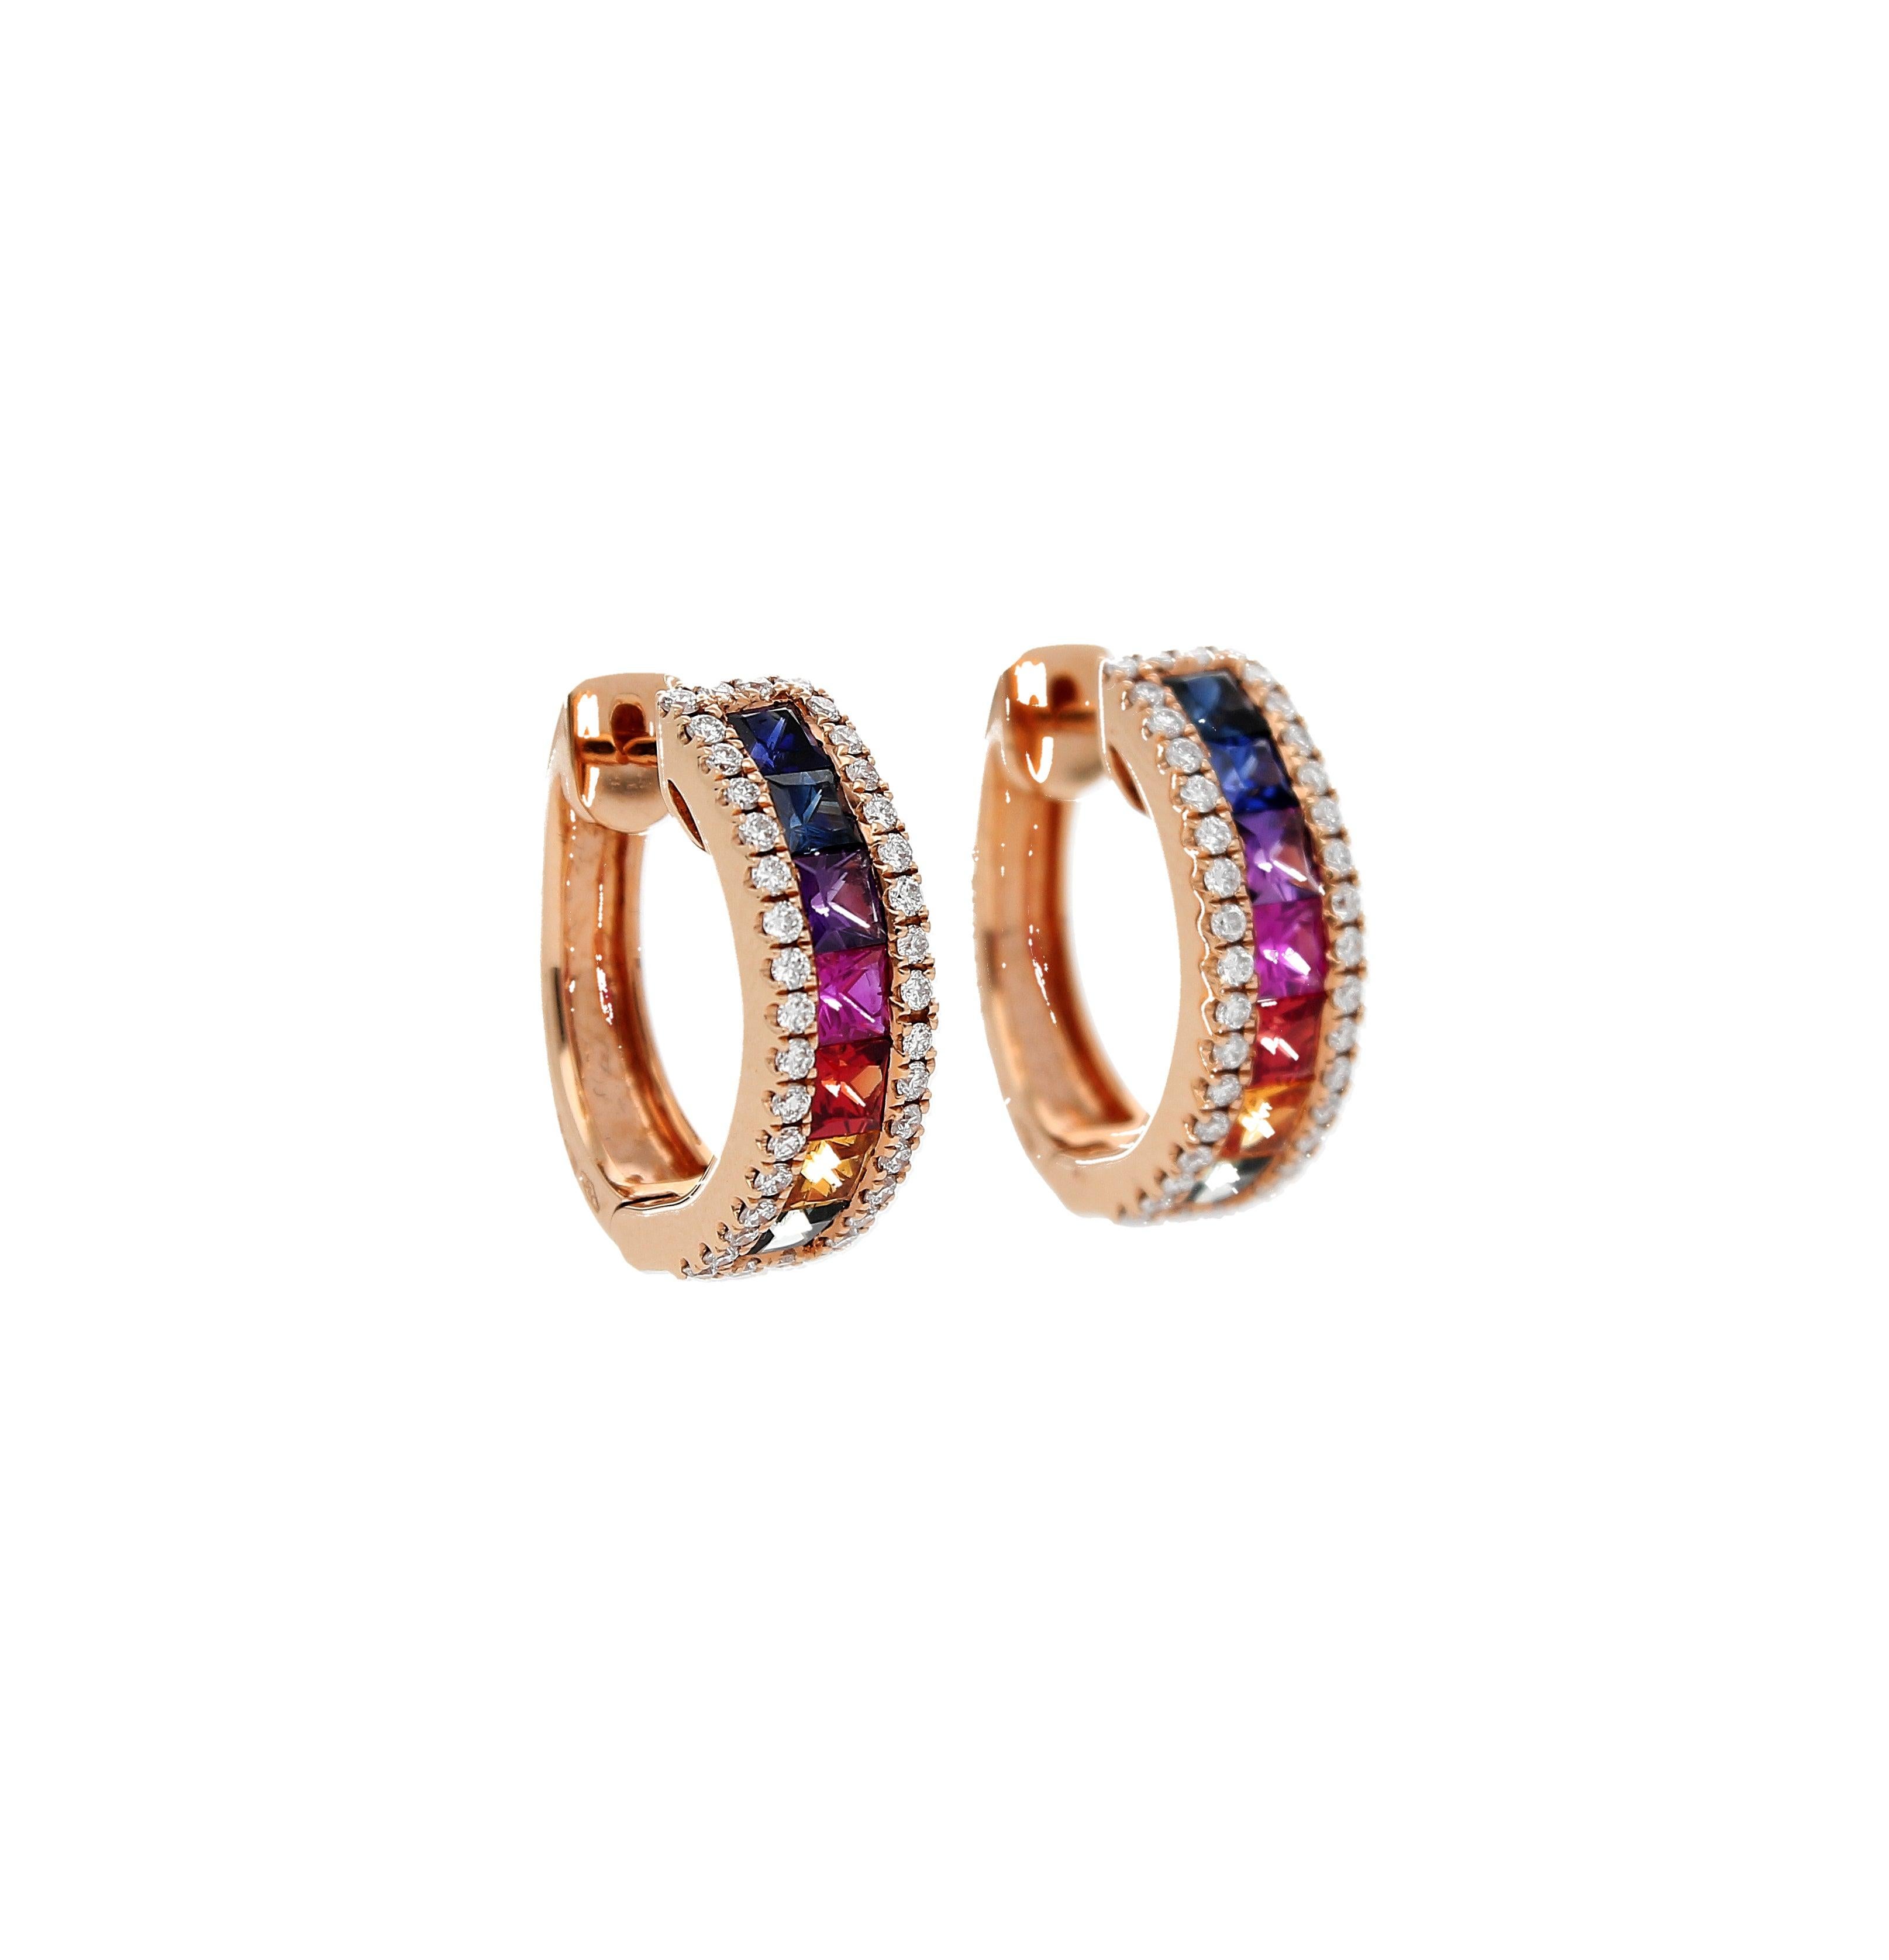 Hand-made in Italy
2.33 ct. Multicolor Sapphire Princess cut
0.64 ct. Withe diamond Round cut
8.8 Weight Earring
18 KT Rose Gold